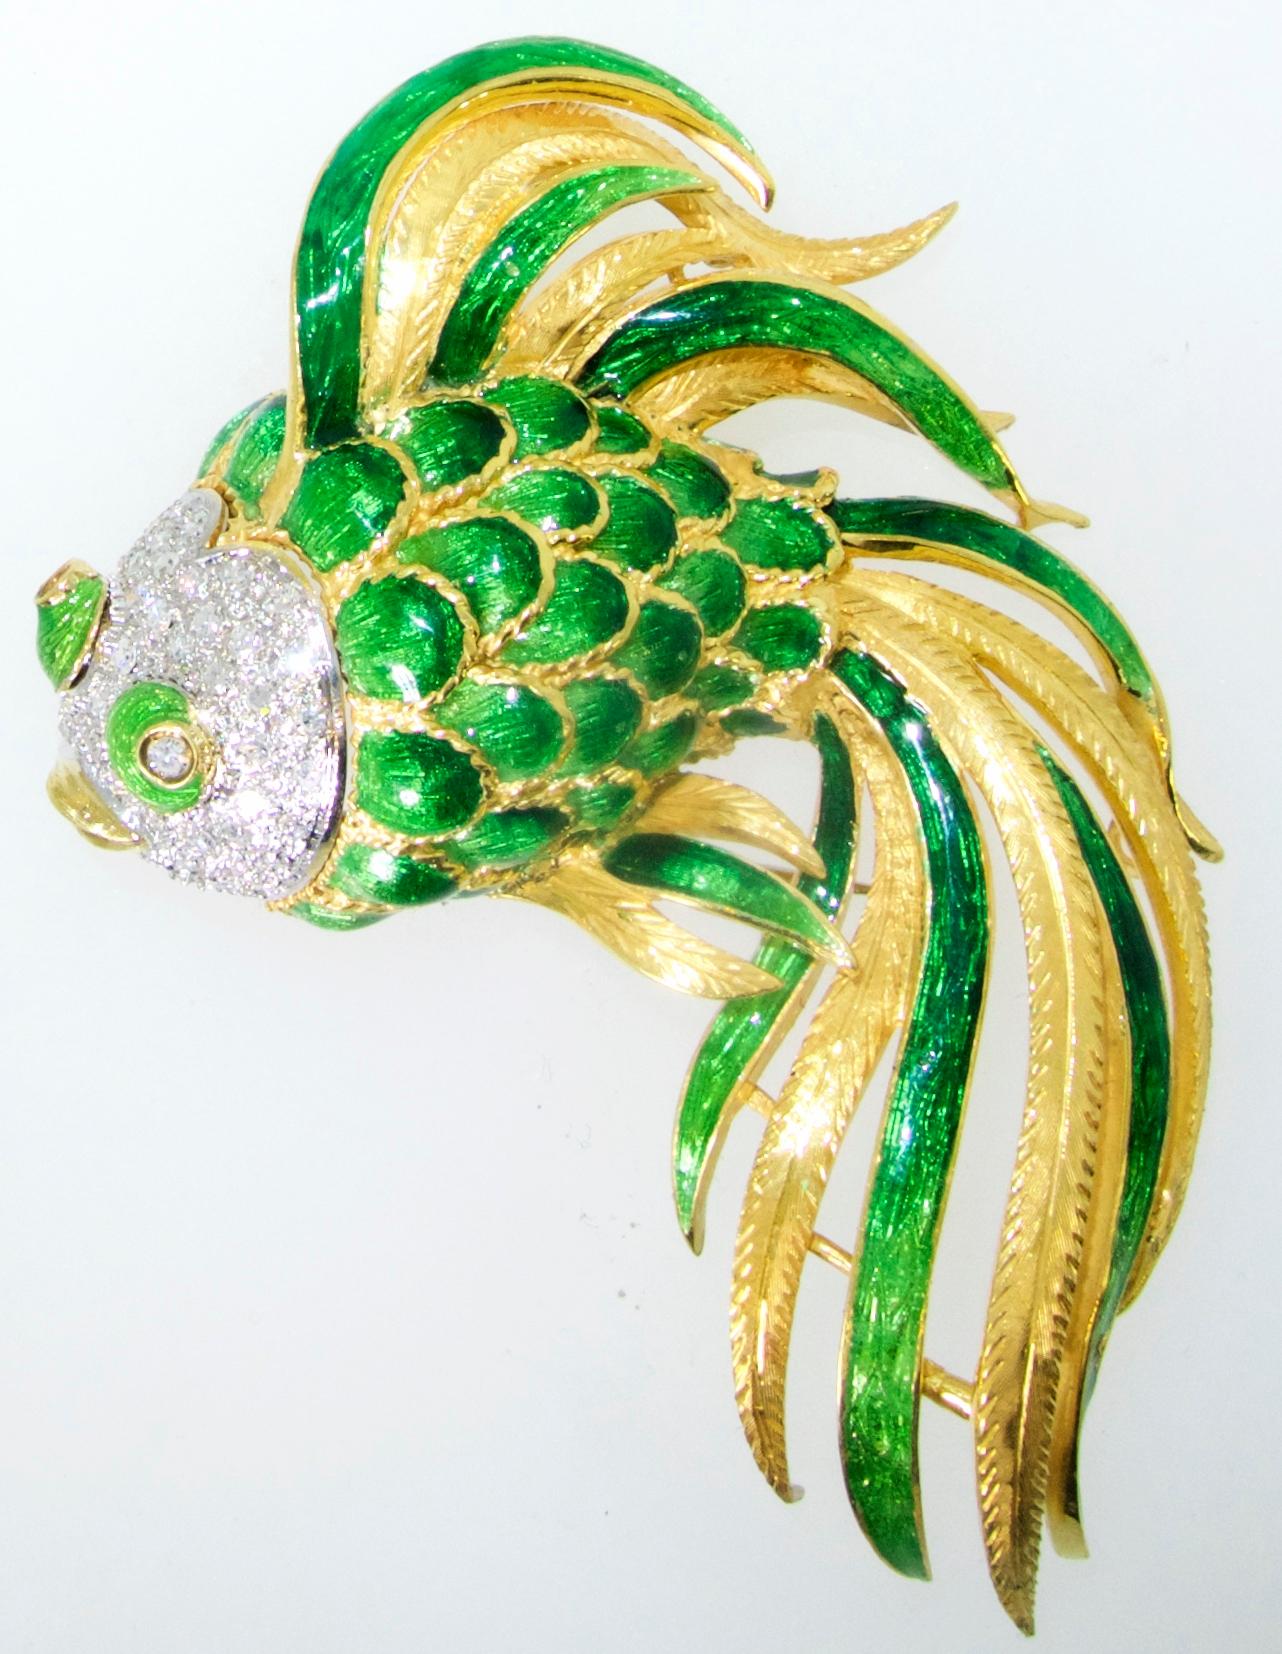 Women's or Men's Fish Brooch, Large and Colorful with Diamonds, circa 1960